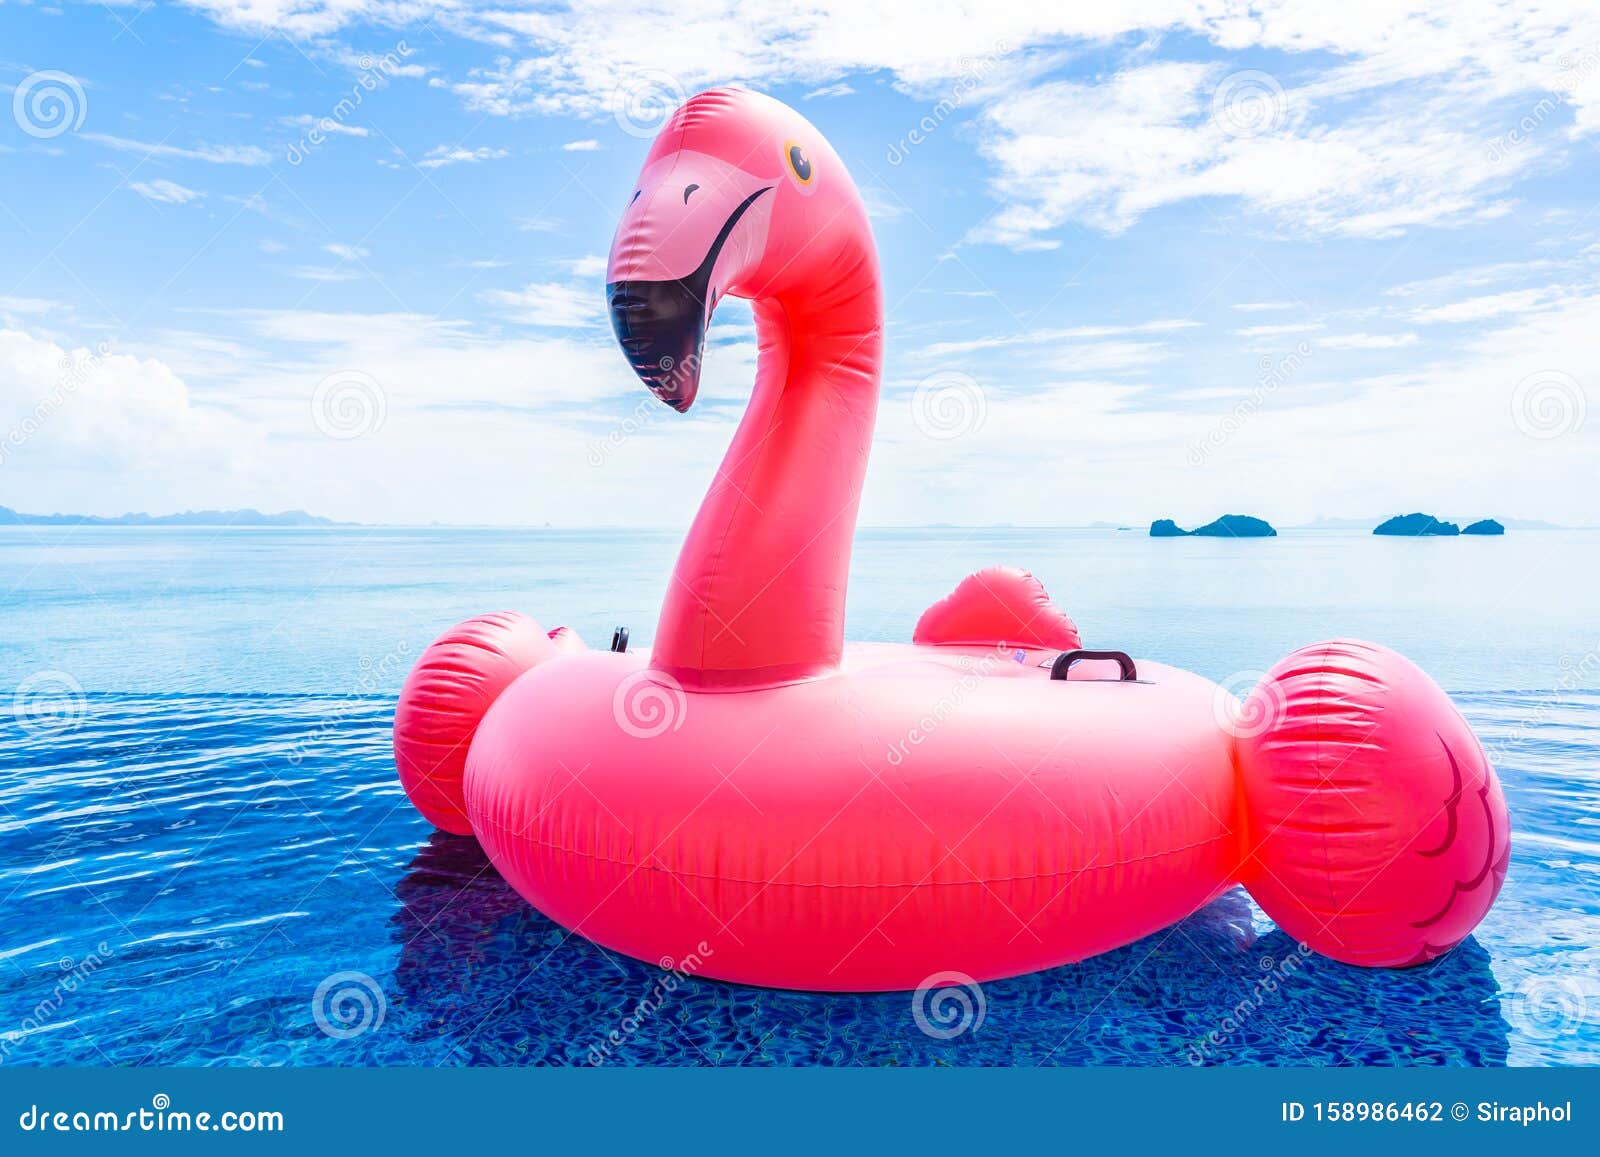 beautiful outdoor swimming pool in hotel resort with flamingo float around sea ocean white cloud on blue sky